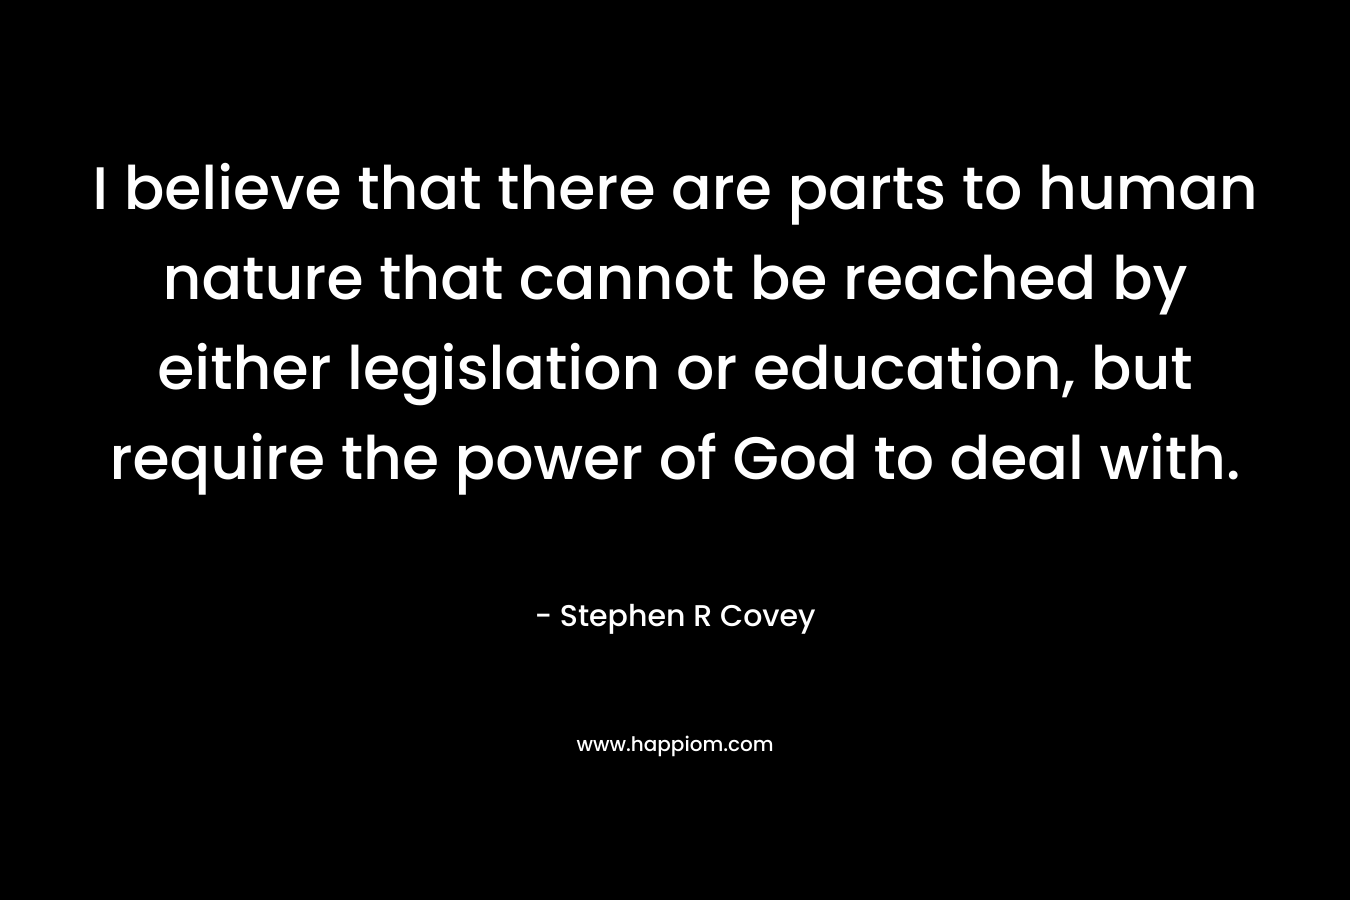 I believe that there are parts to human nature that cannot be reached by either legislation or education, but require the power of God to deal with.